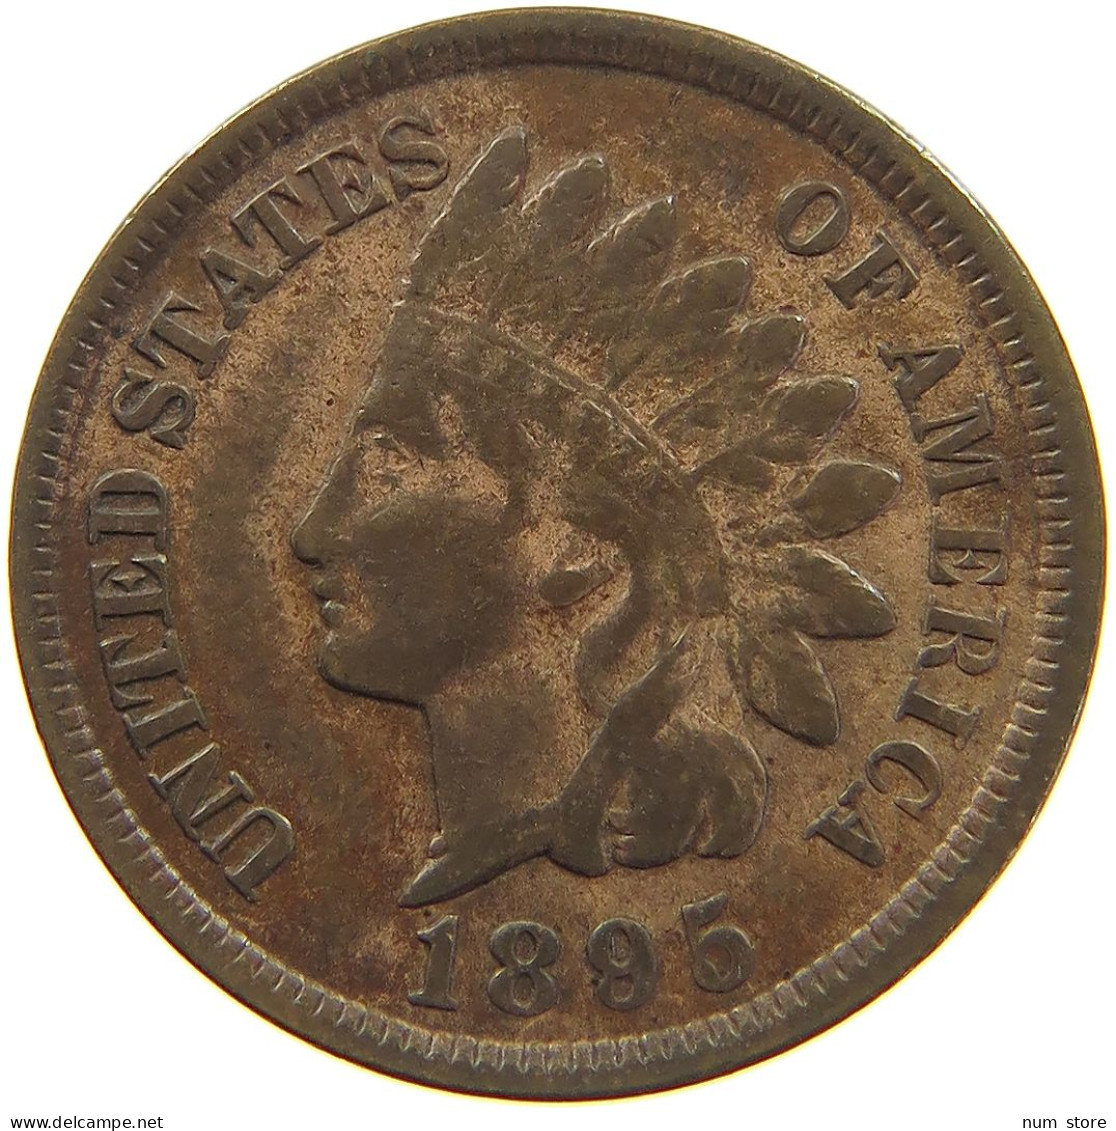 UNITED STATES OF AMERICA CENT 1895 INDIAN HEAD #c036 0345 - 1859-1909: Indian Head